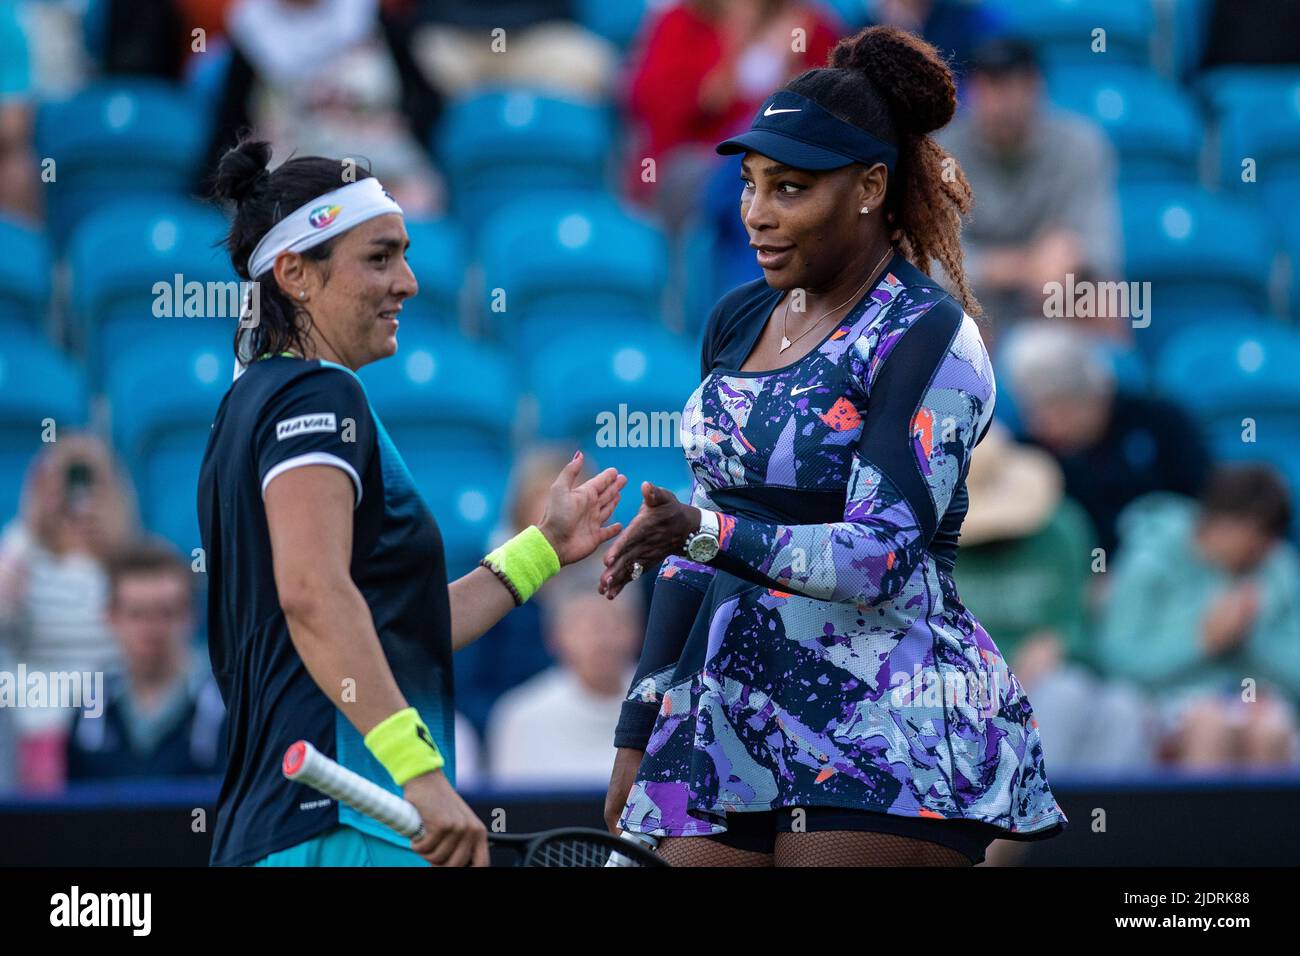 EASTBOURNE, ENGLAND - JUNE 22: Serena Williams of the United States Ons Jabeur of Tunisia during the Womens doubles quarter final against Shuko Aoyama of Japan and Hao-Ching Chan of Chinese Taipei on Day Five of Rothesay International Eastbourne at Devonshire Park on June 22, 2022 in Eastbourne, England (Photo by Sebastian Frej) Credit: Sebo47/Alamy Live News Stock Photo